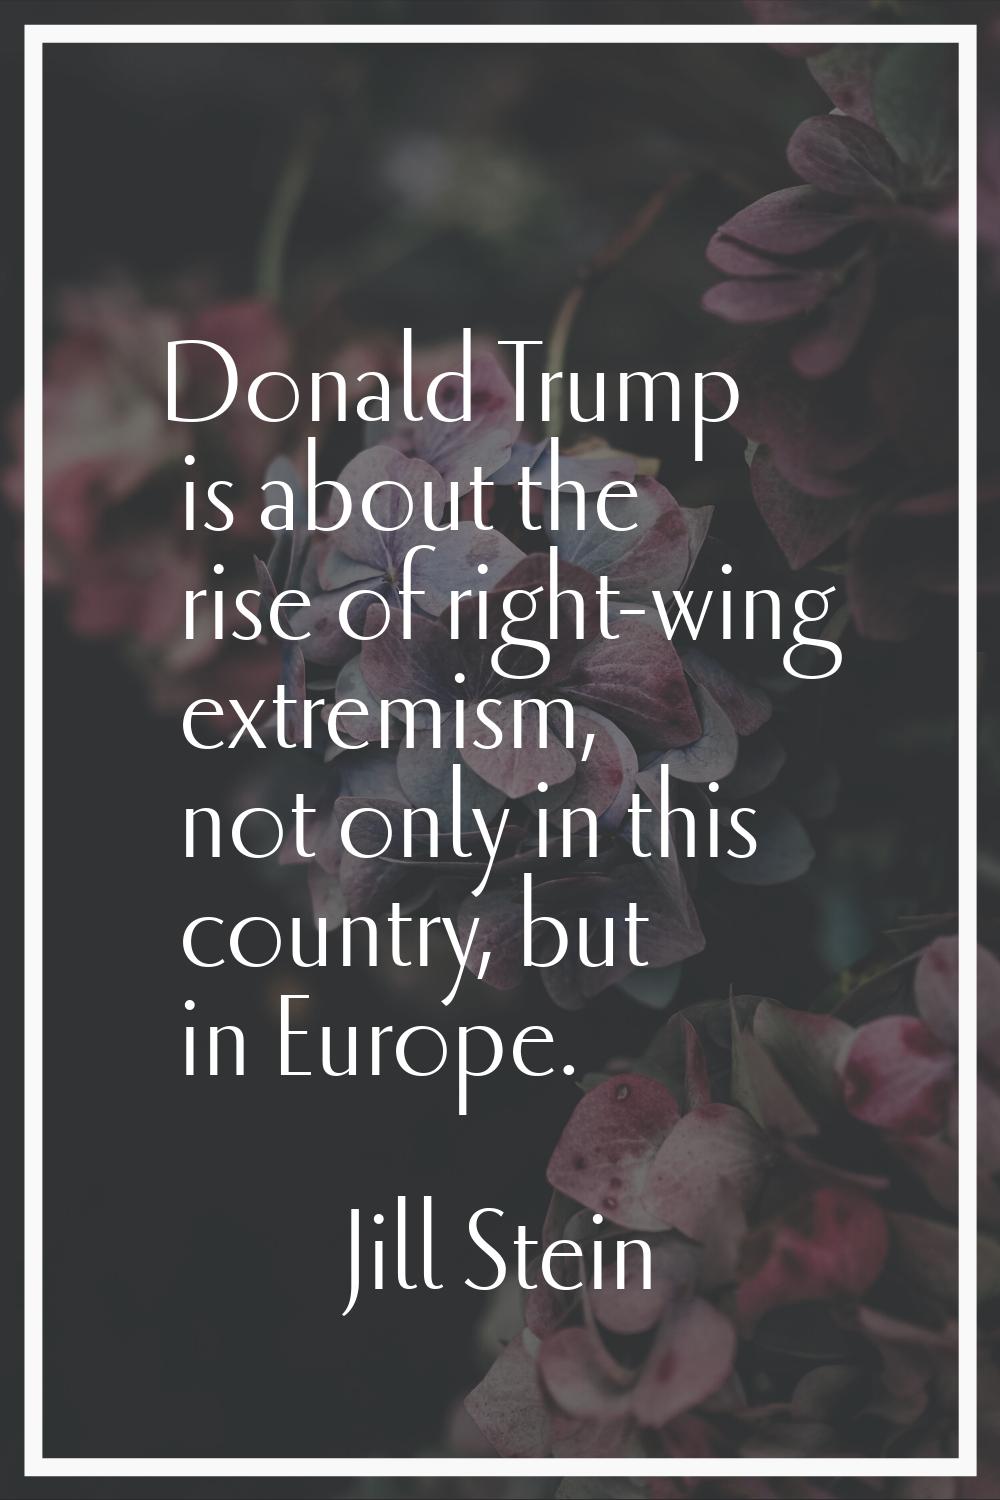 Donald Trump is about the rise of right-wing extremism, not only in this country, but in Europe.